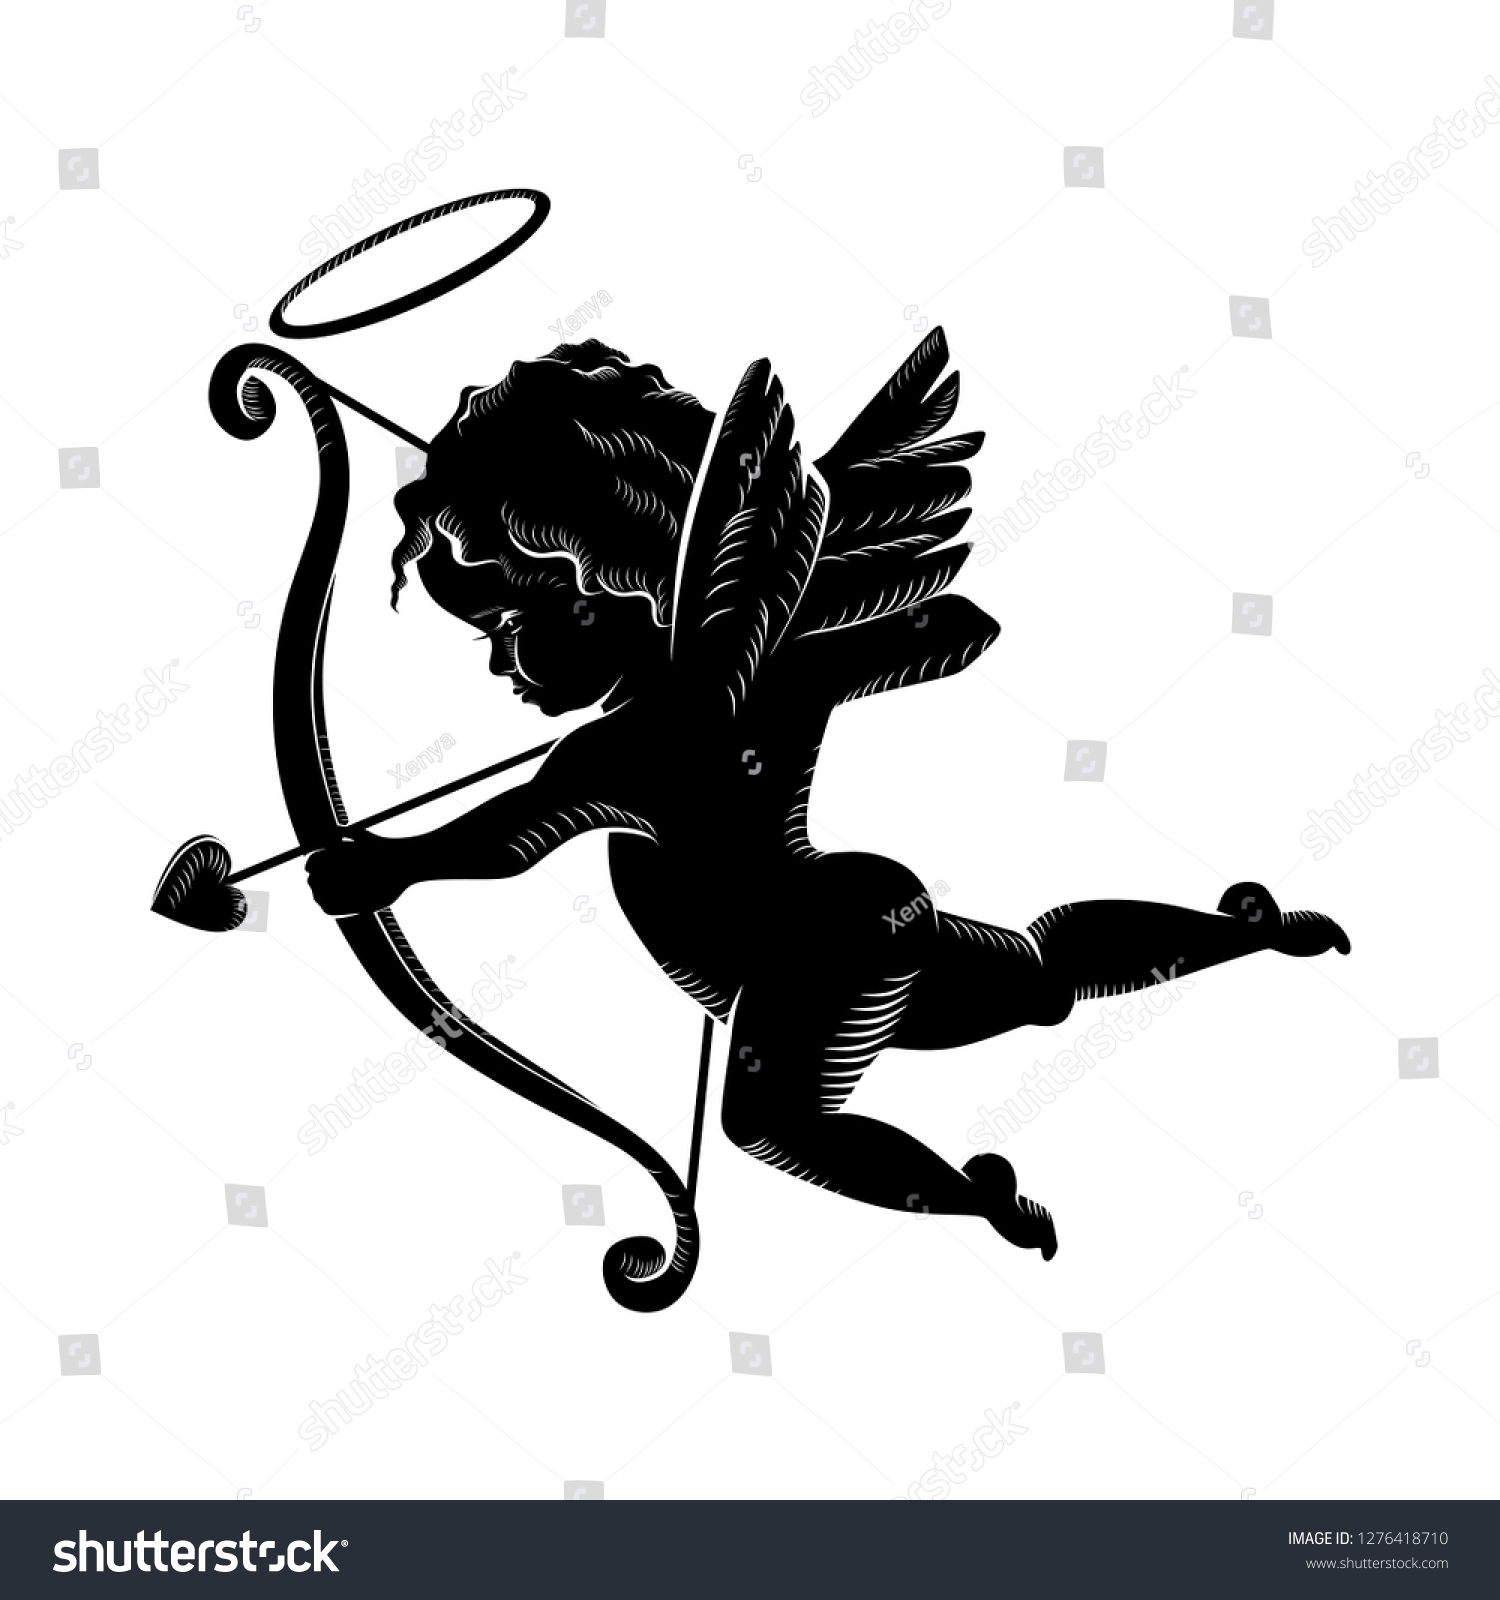 SVG of Silhouette of an angel, Cupid cherub with a bow and arrows, isolated image. Vector illustration EPS 10 svg